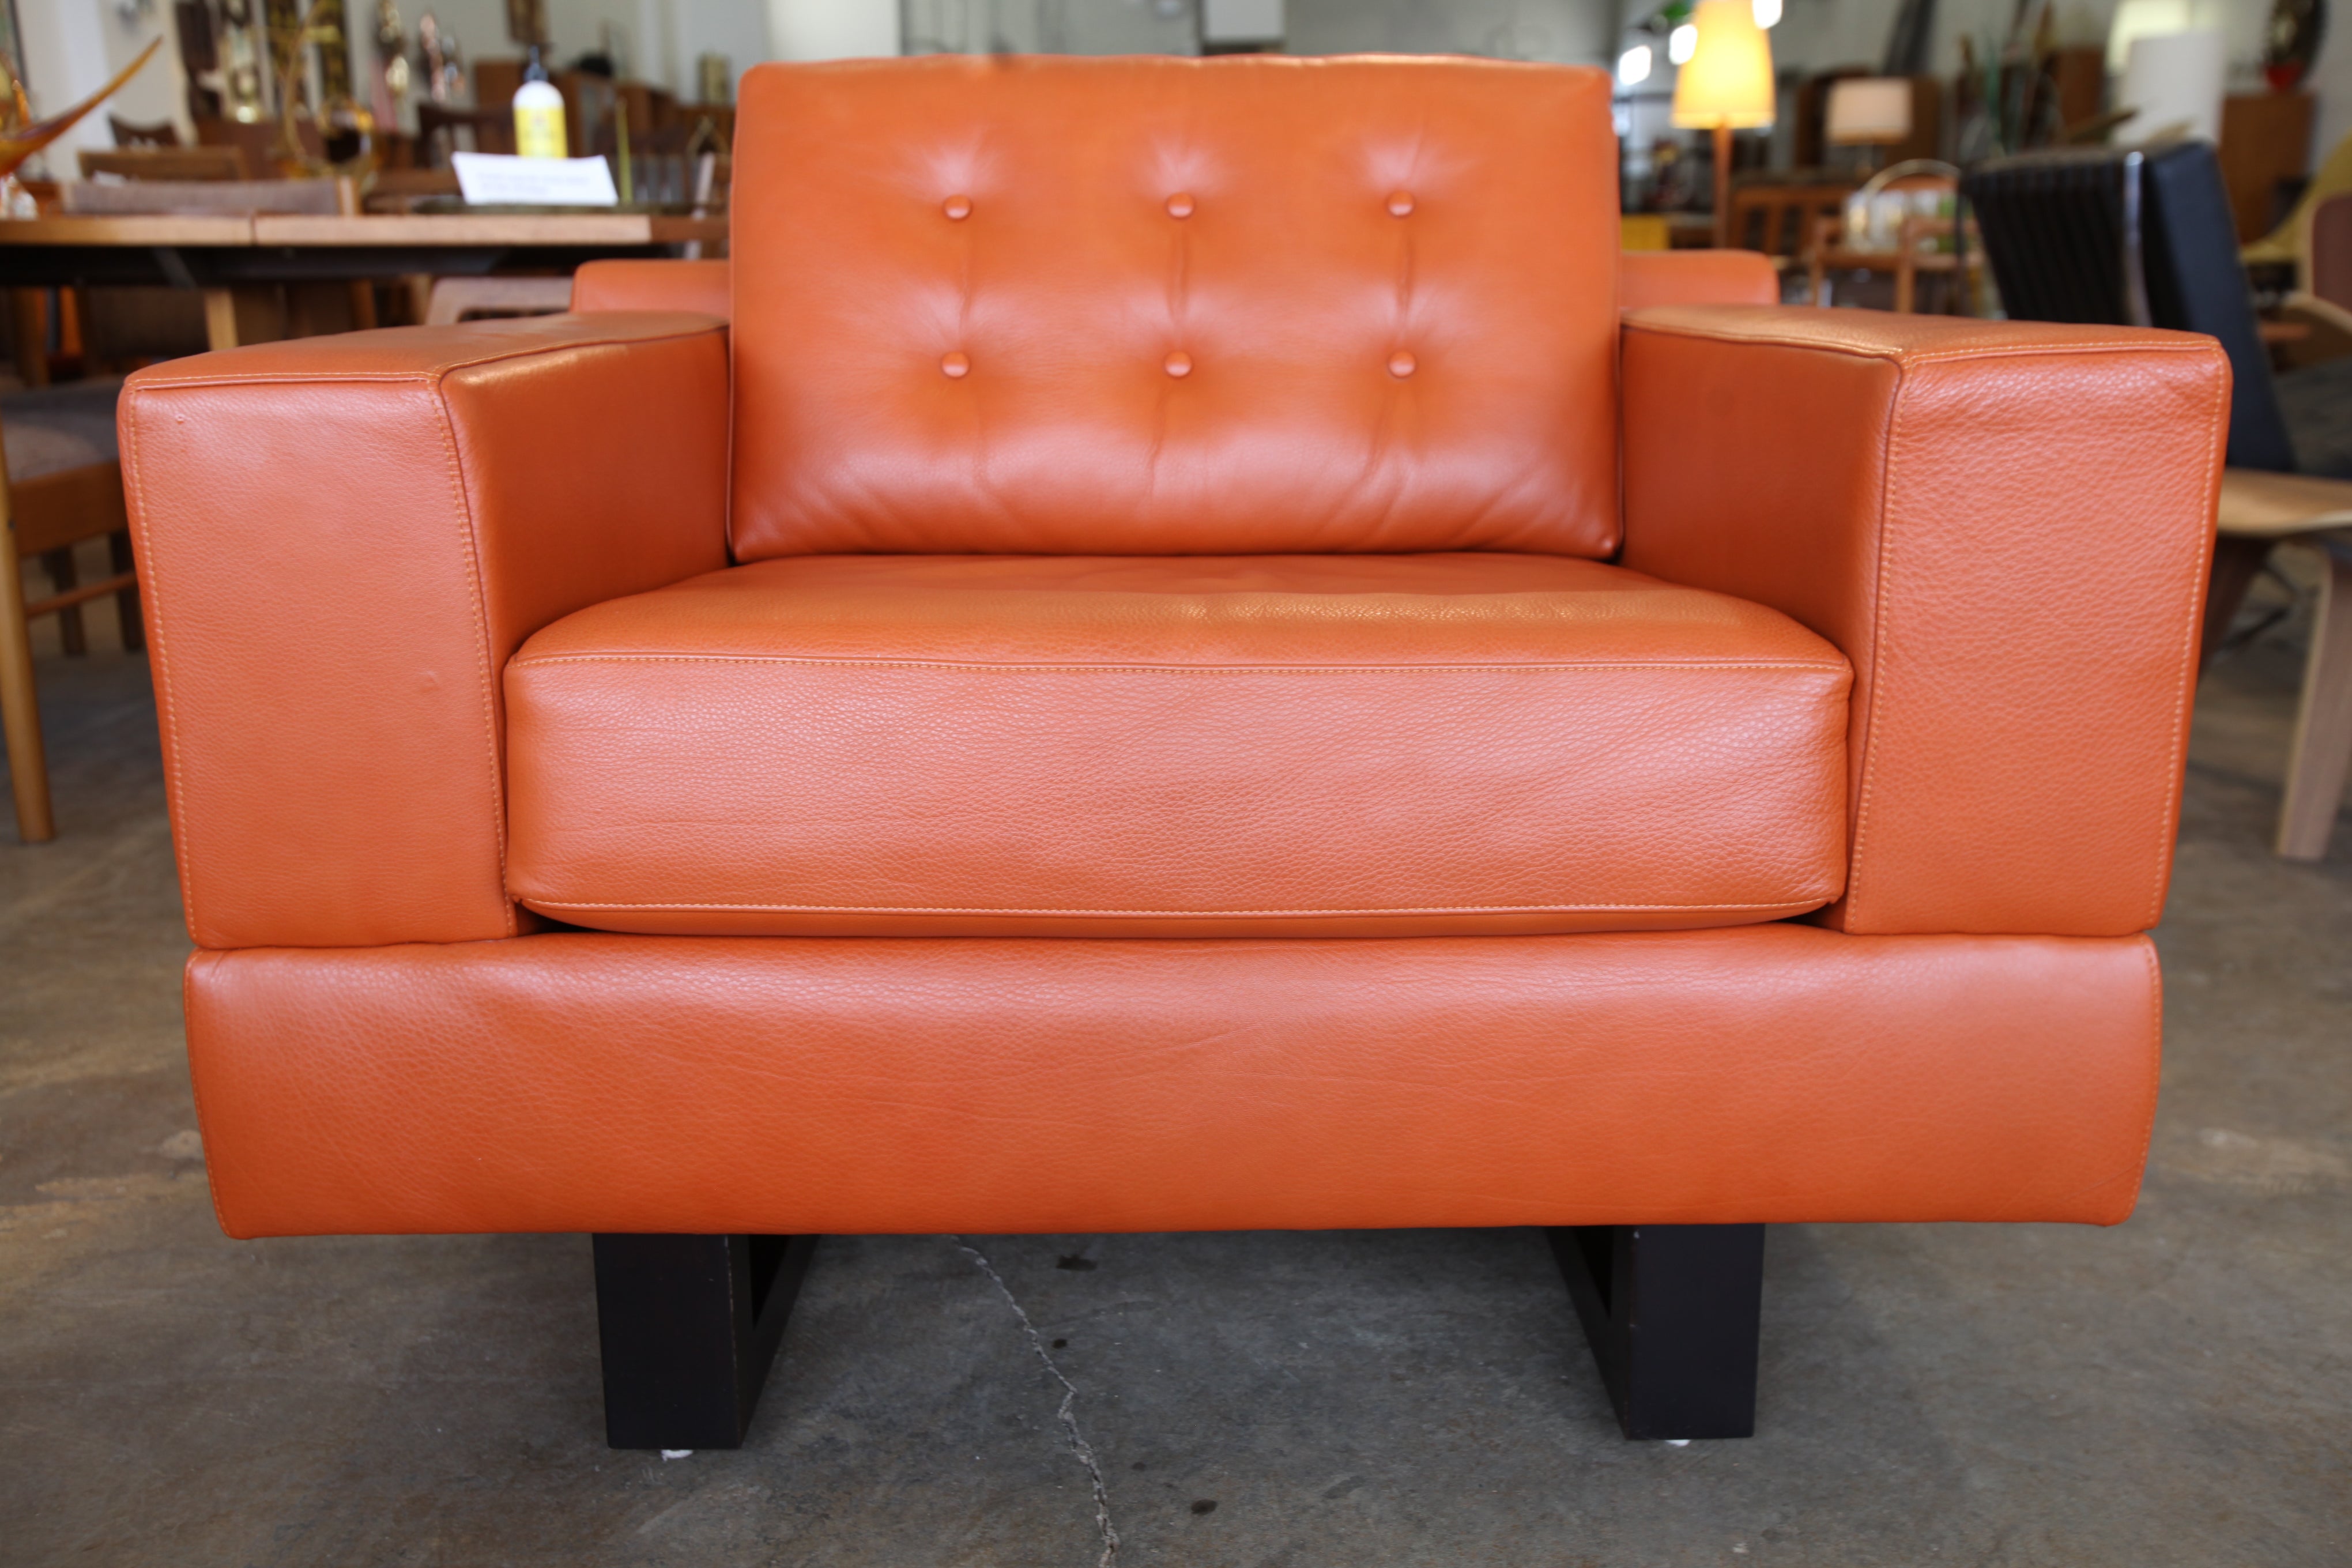 Fabulous Burnt Orange Leather Arm Chair by American Leather (39.5"W x 34"D x 31"H)